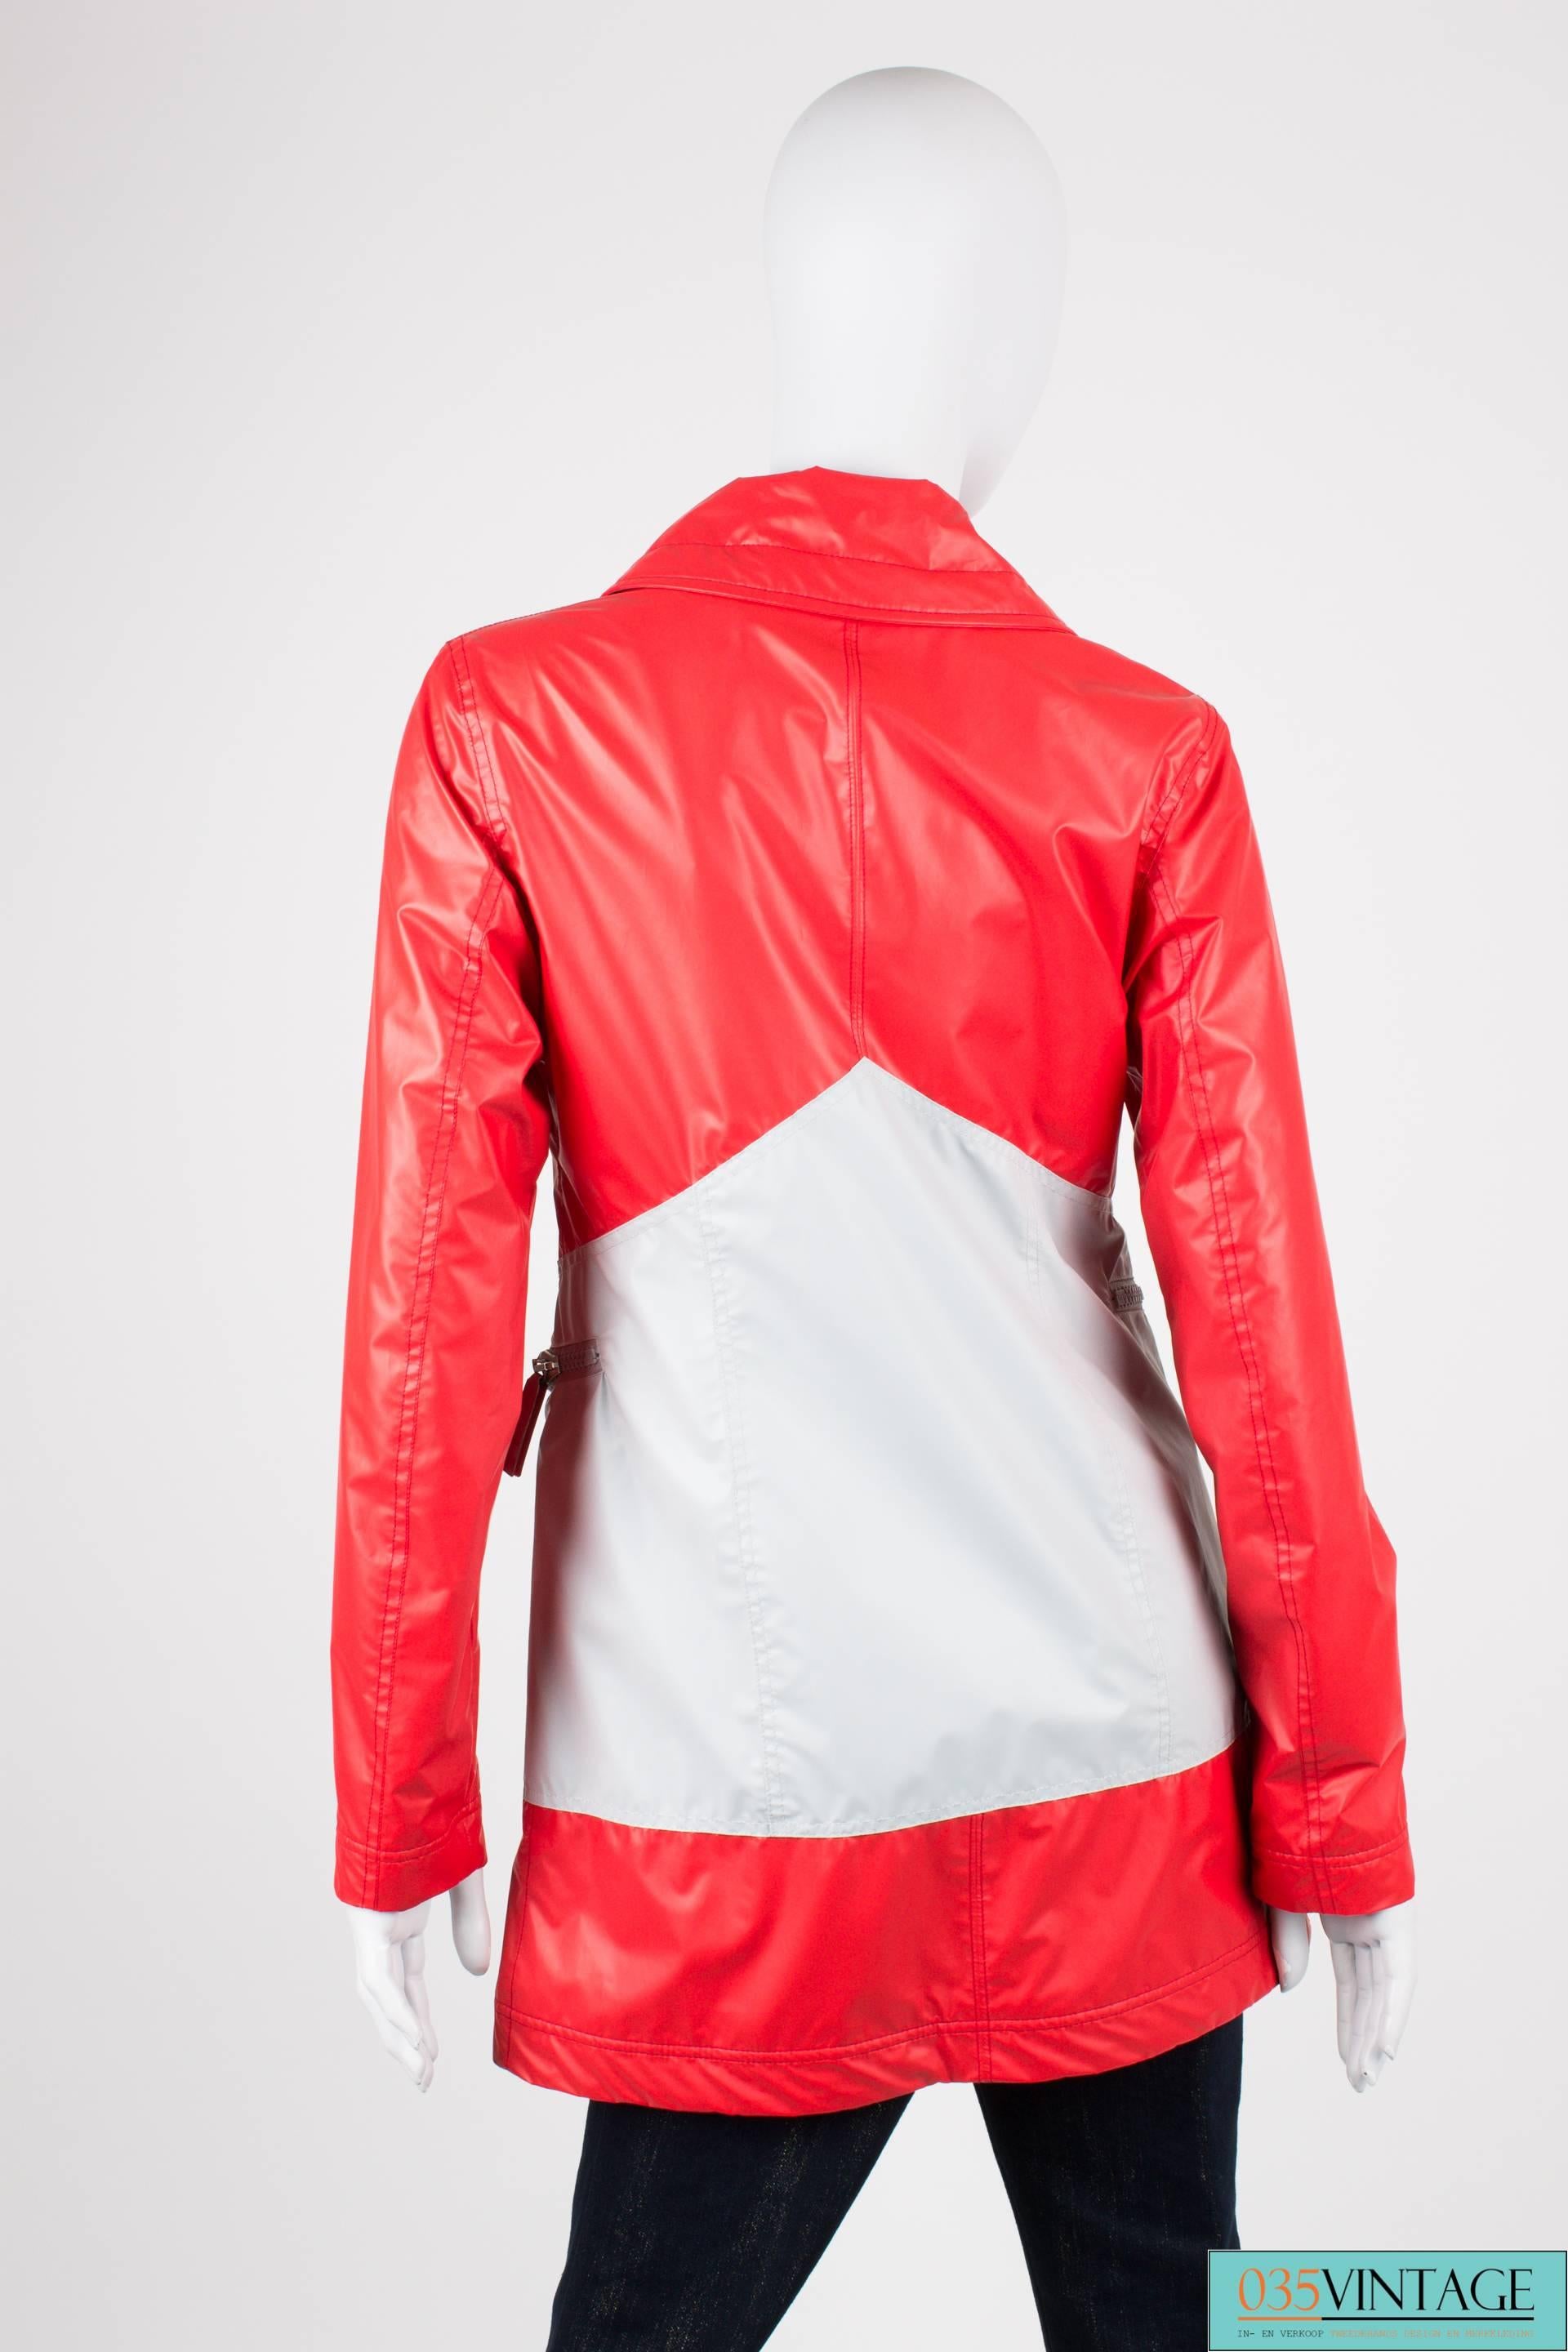 Sophisticated in the rain! A sporty raincoat by Chanel in red and grey. Cool!

This bright red parka has two large zip pockets at the front in the light grey area, this grey part goes all the way to the back. Two zippers at the chest. A large